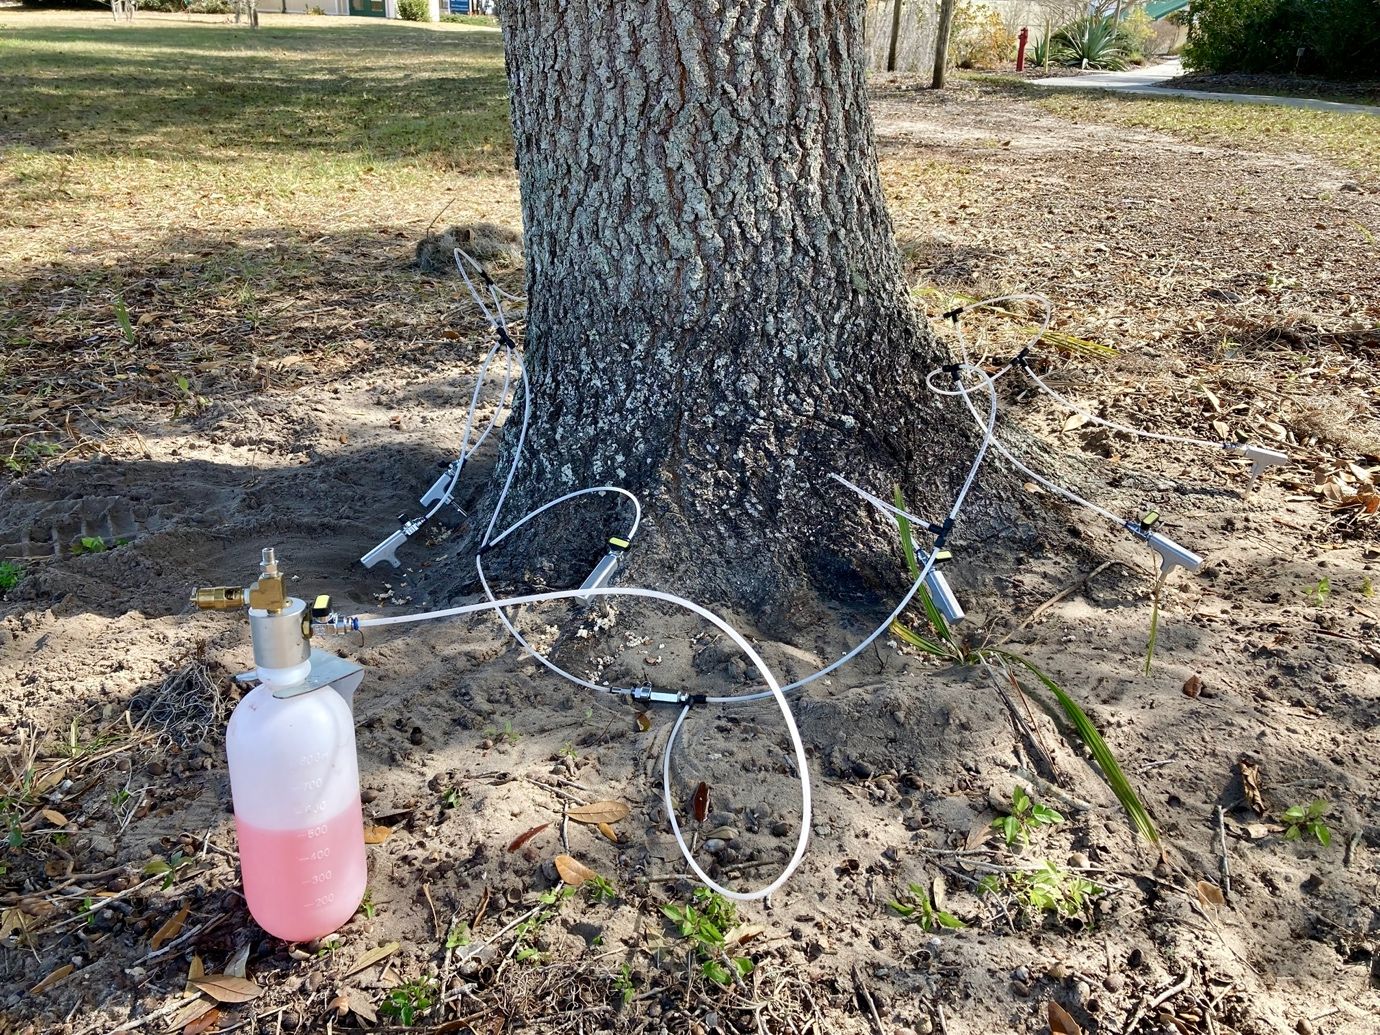 Injection of a product (pesticide or nutrients) into a tree.